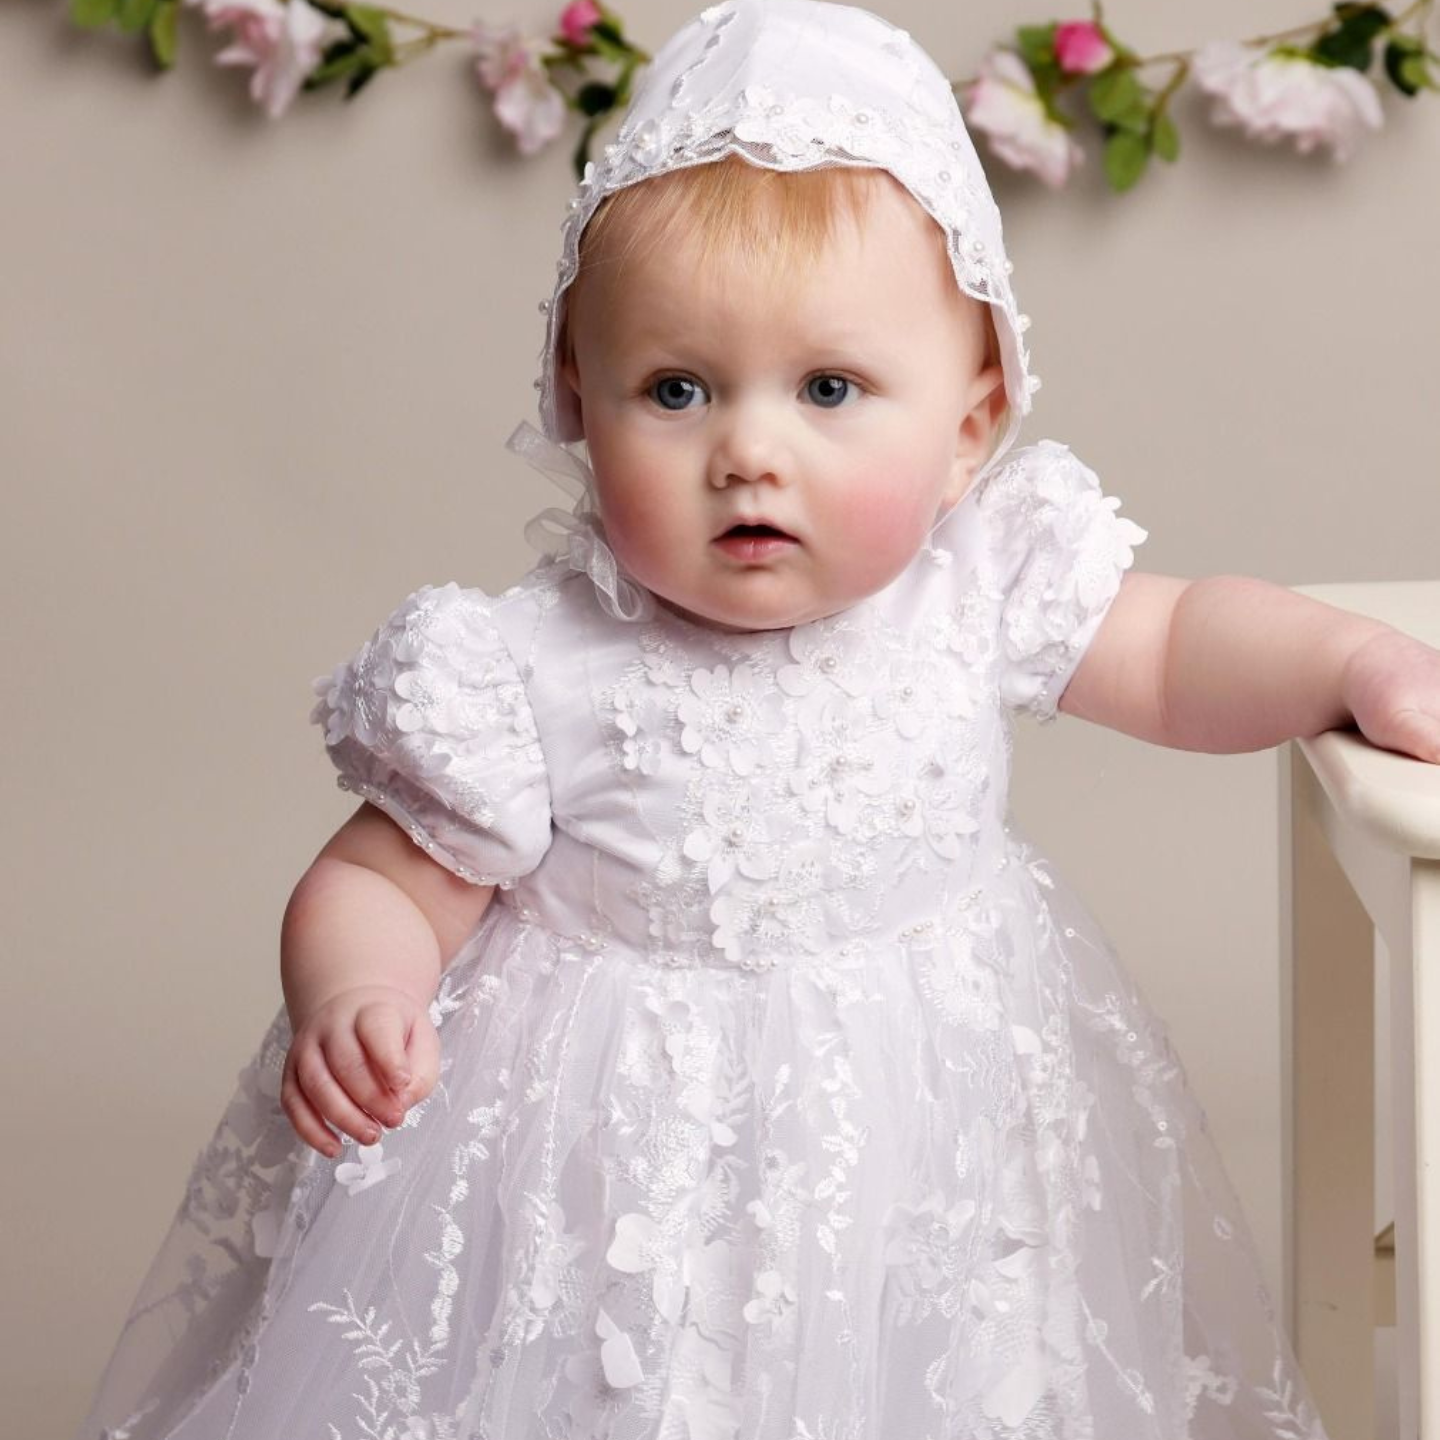 Elegant Lace Christening Gown for Baby Long Sleeve First Communion Dress  Toddler Infant Baptism Gowns - AliExpress